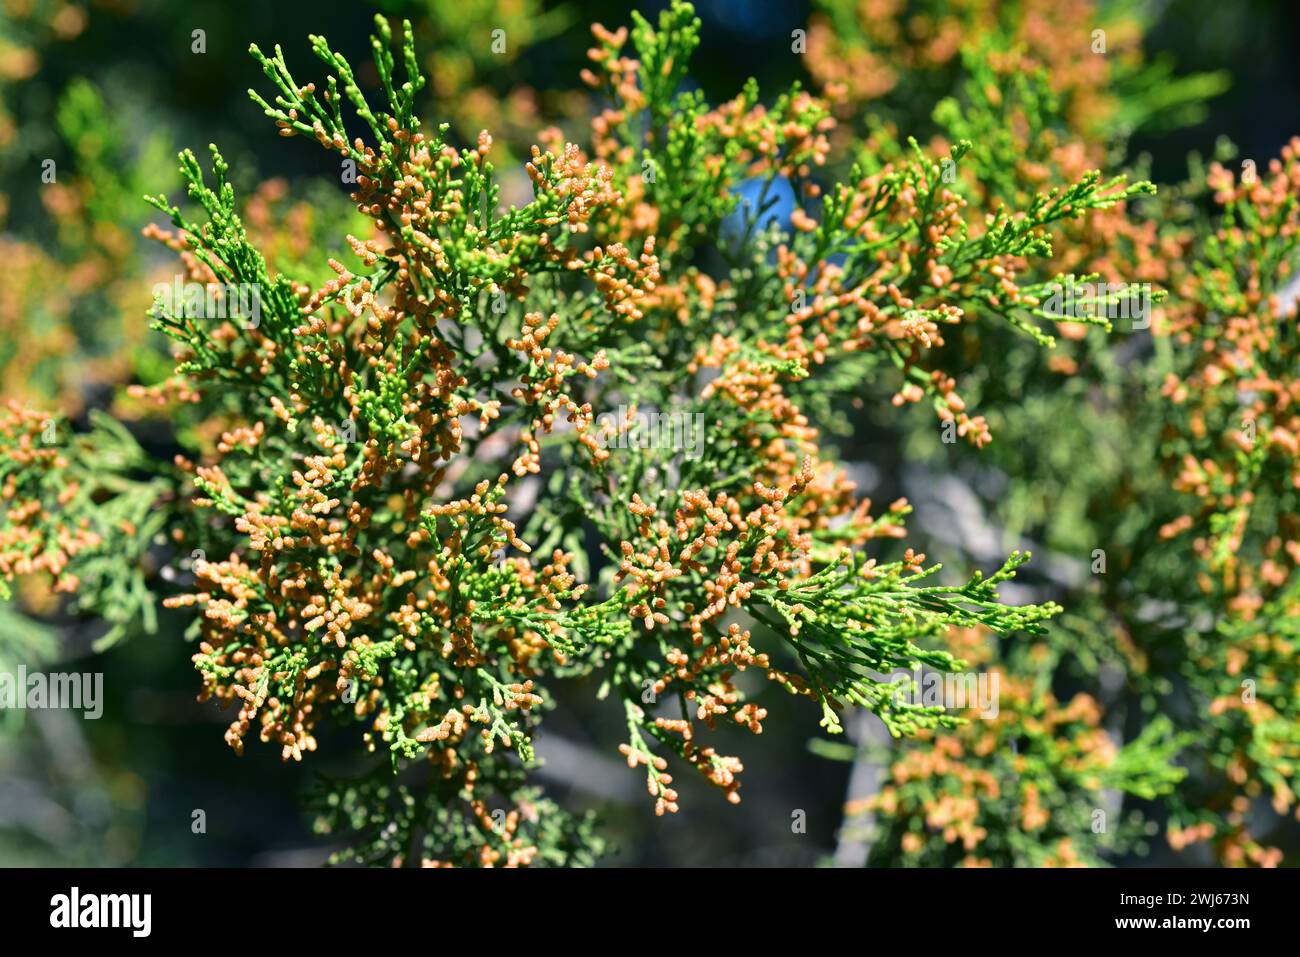 Rottnest Island pine or southern cypress pine (Callitris preissii) is a conifer endemic to Australia. Male flowers detail. Stock Photo